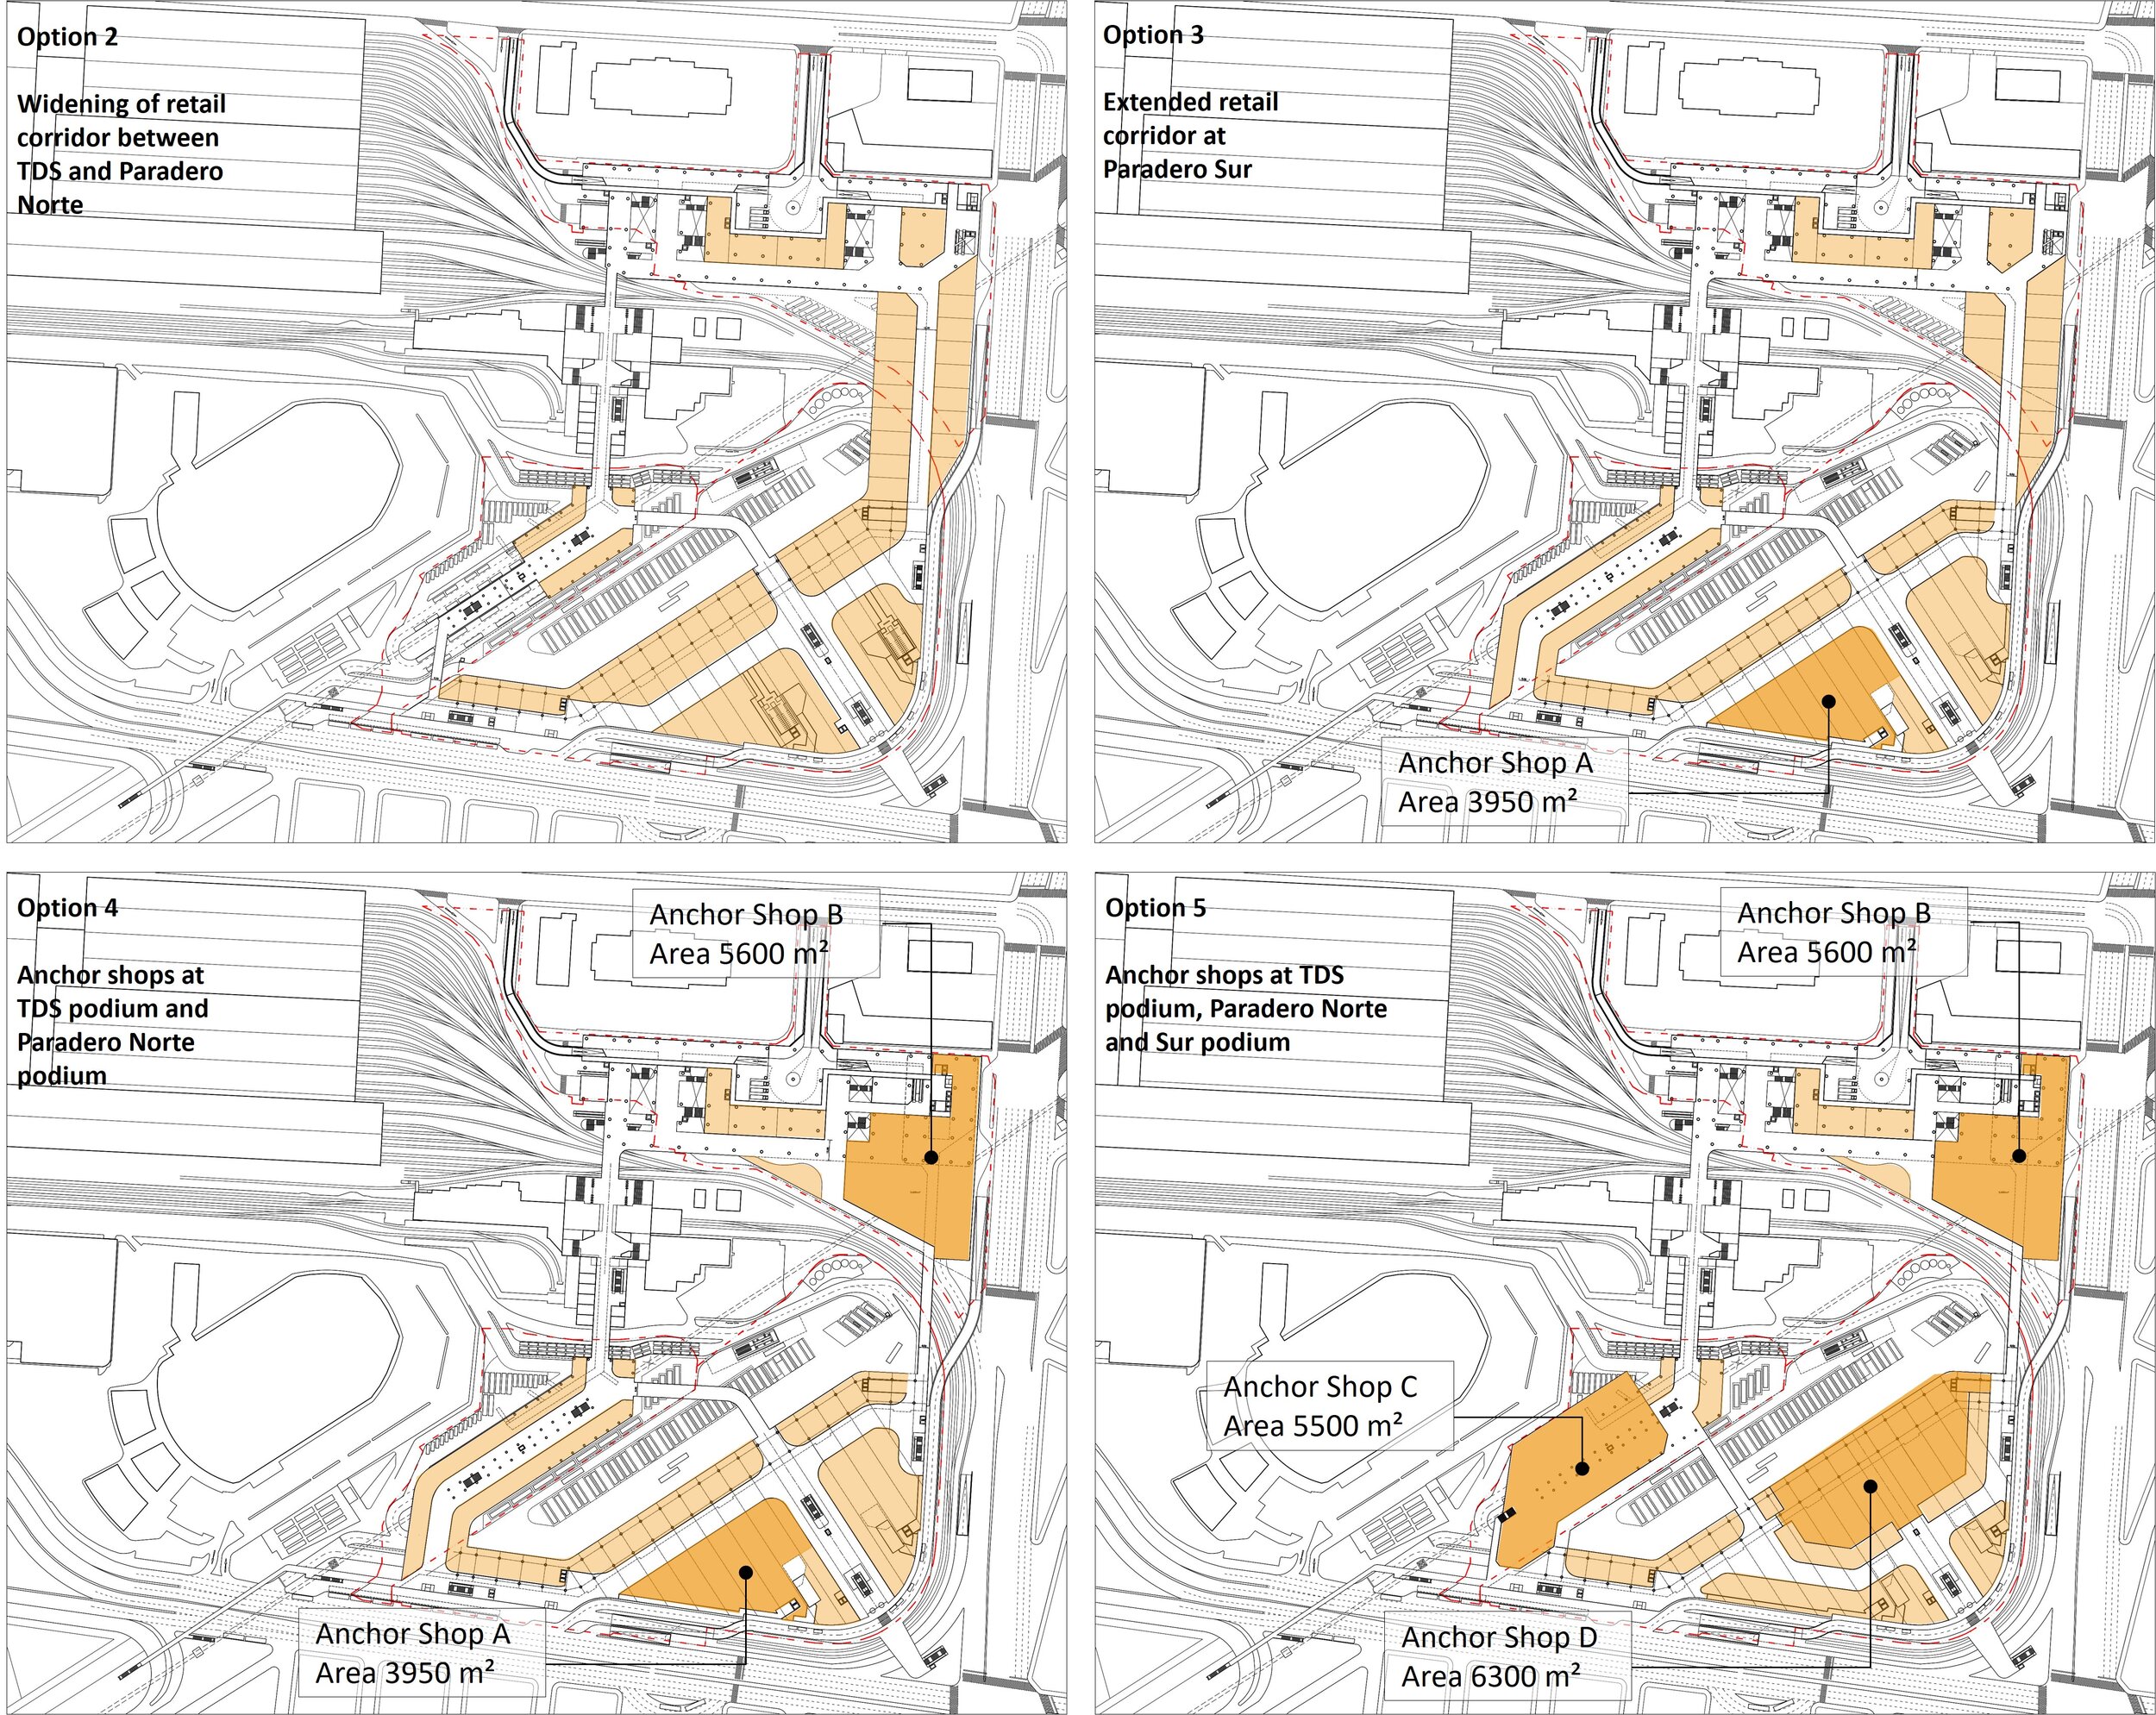 Shops layout analysis for the Tasqueña CETRAM